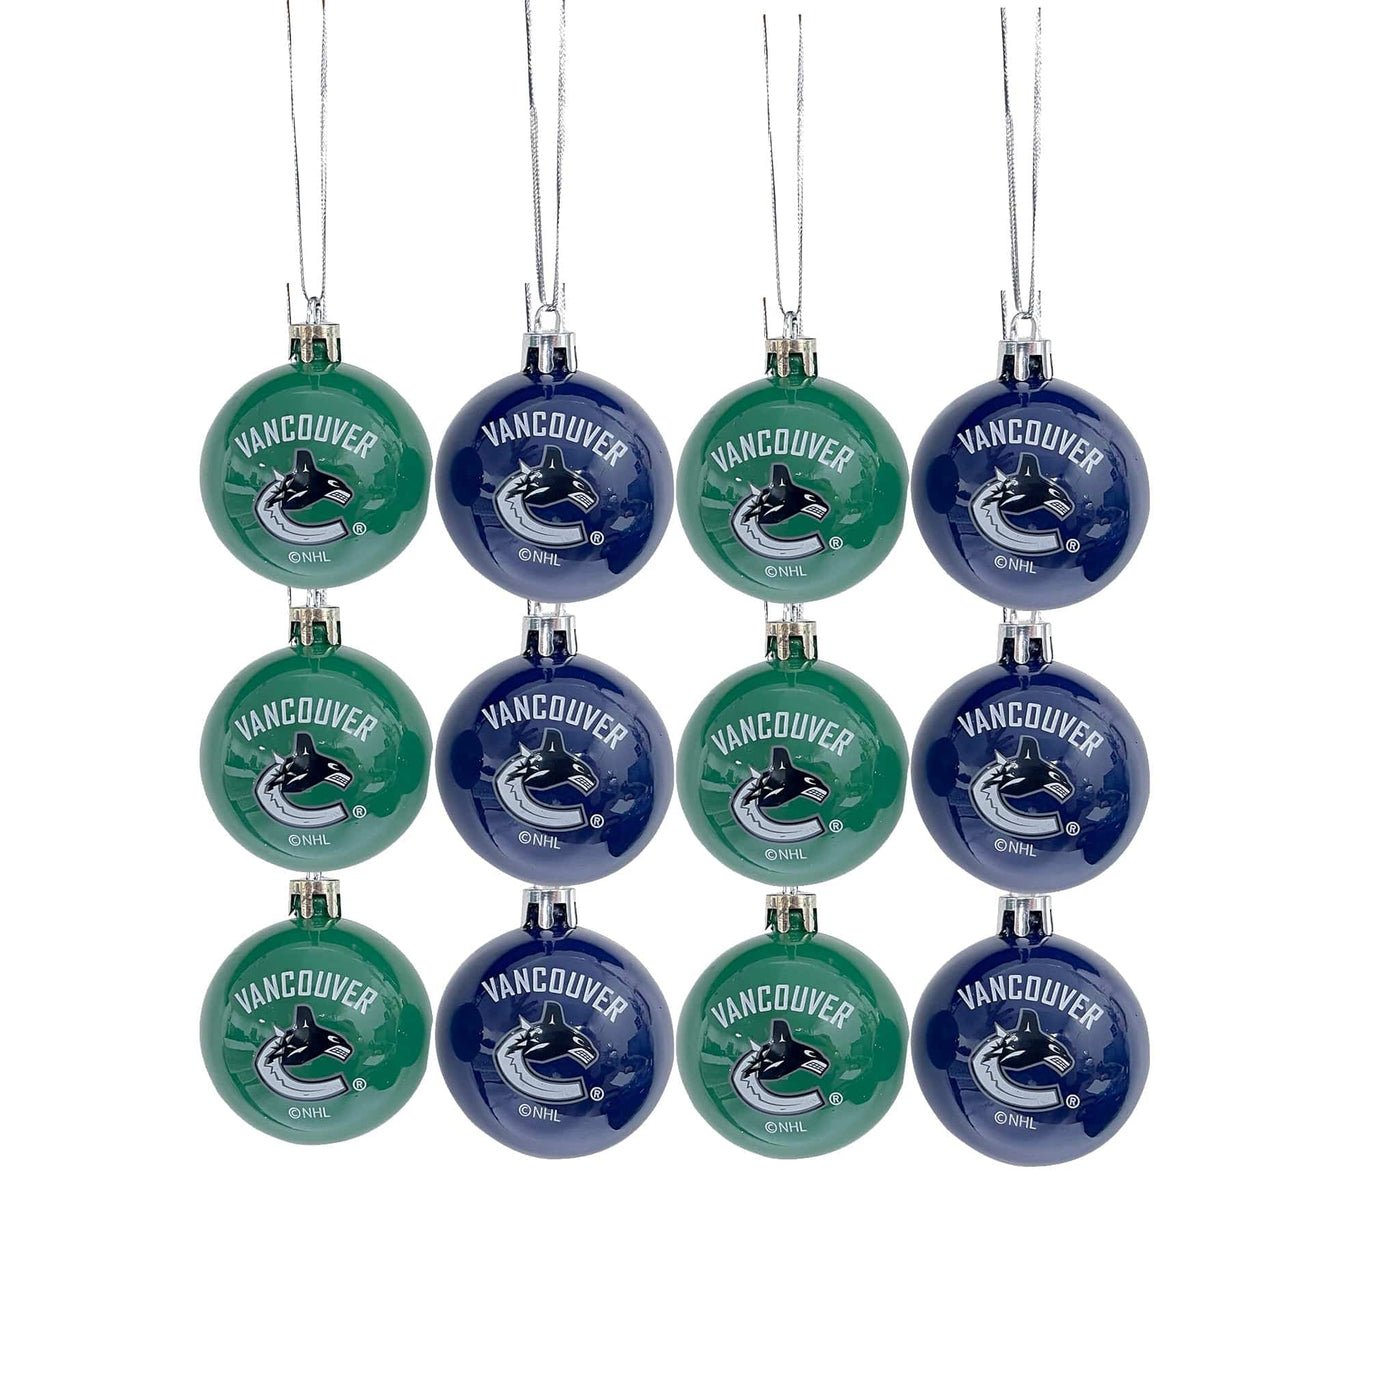 Forever Collectibles NHL Plastic Ball Ornament (12-Pack) - Vancouver Canucks - TheHockeyShop.com